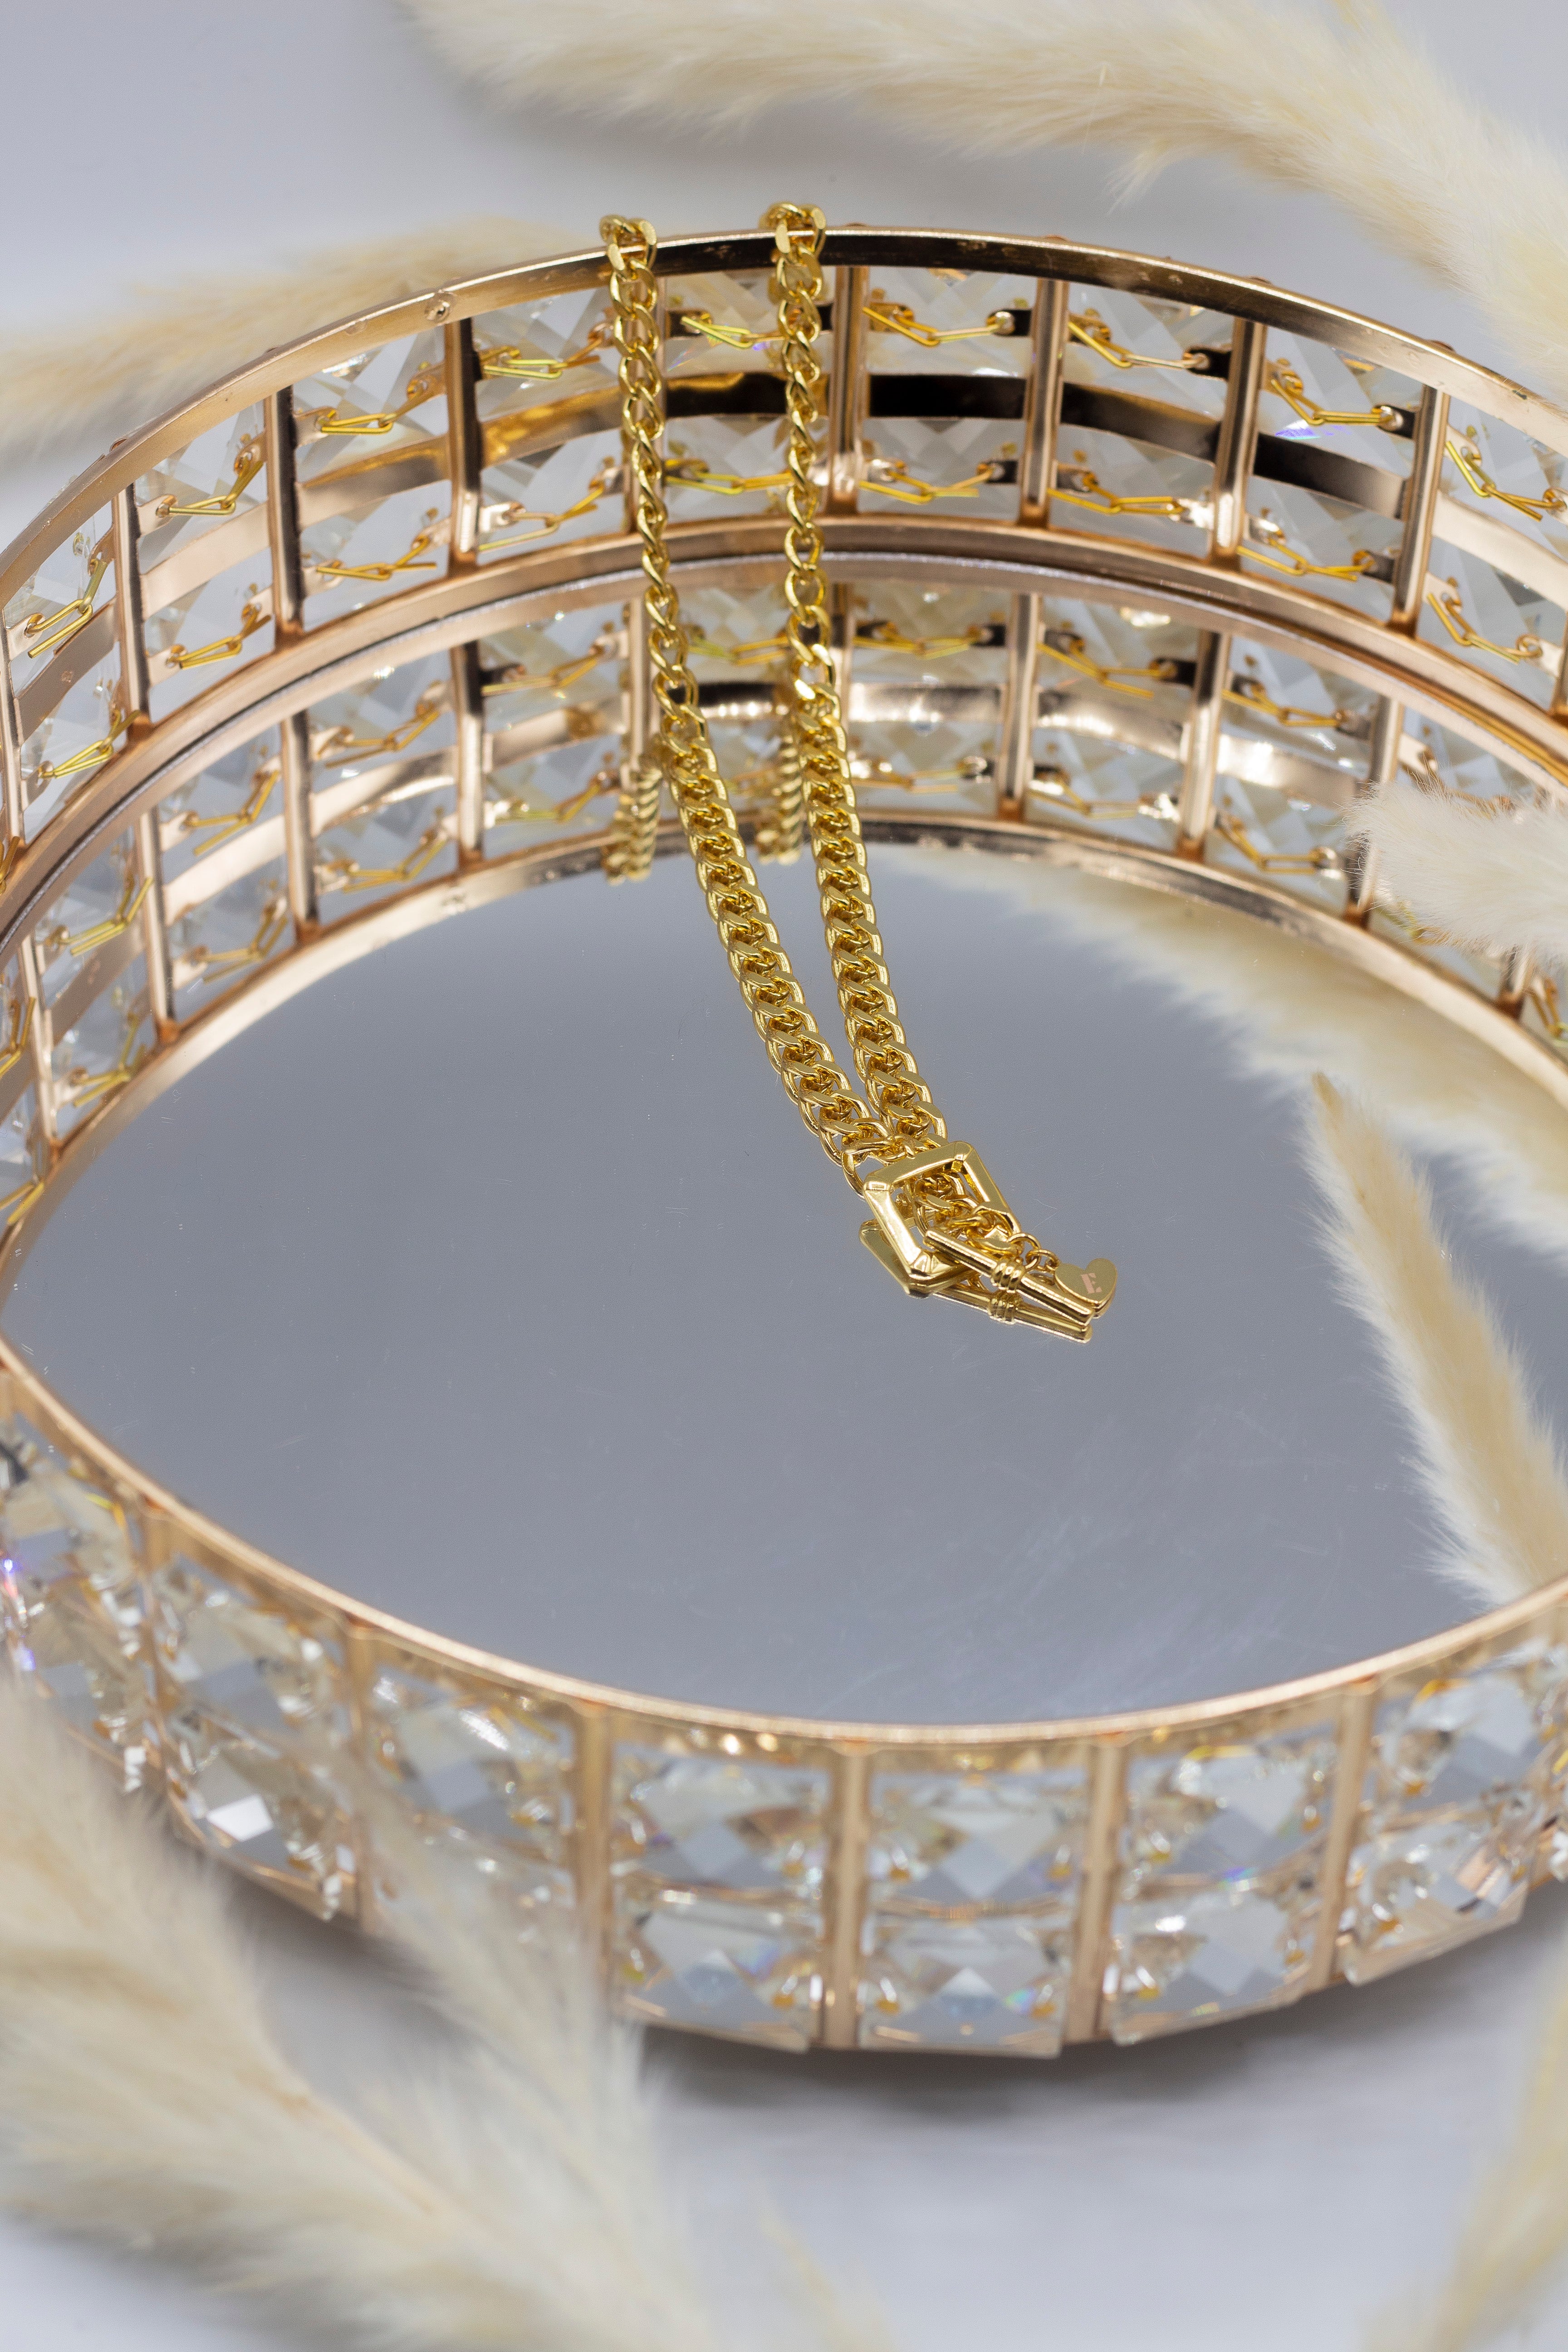 18k gold stainless steel buckle chain necklace placed on a mirror. Ella Buckle Chain by E's Element.